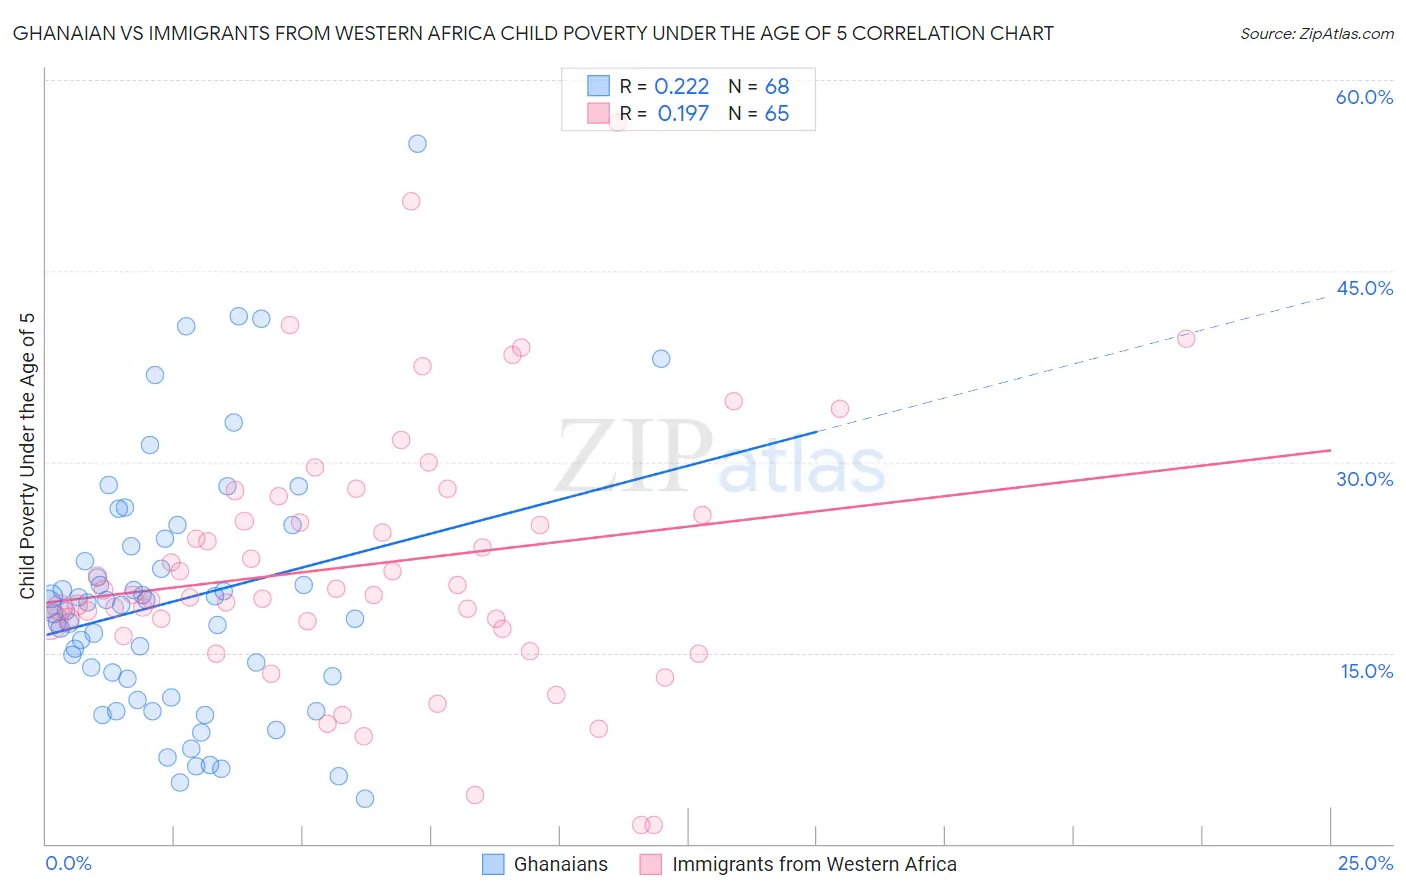 Ghanaian vs Immigrants from Western Africa Child Poverty Under the Age of 5